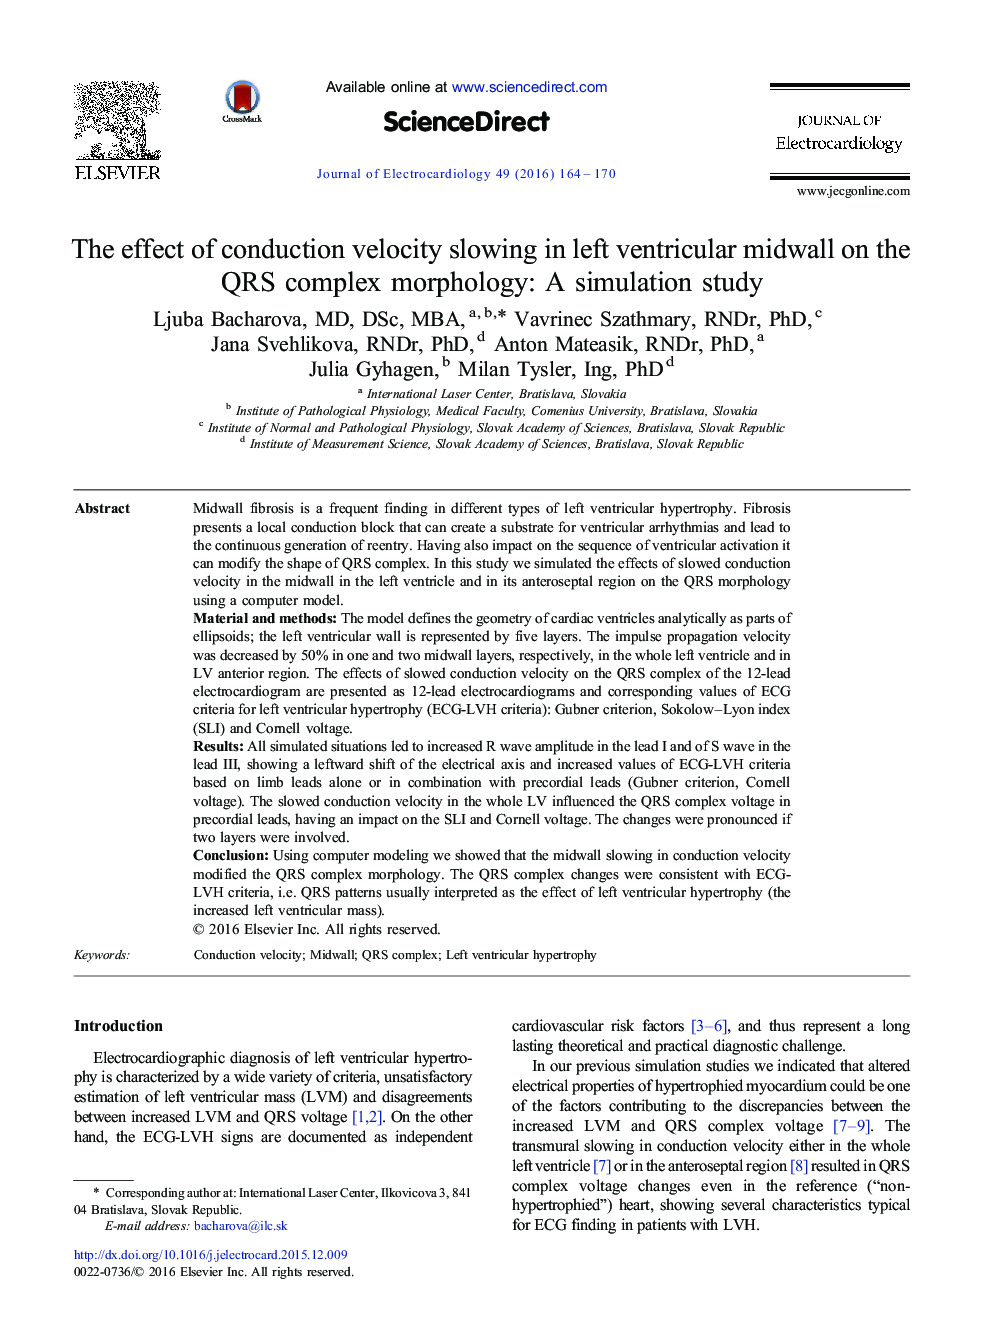 The effect of conduction velocity slowing in left ventricular midwall on the QRS complex morphology: A simulation study